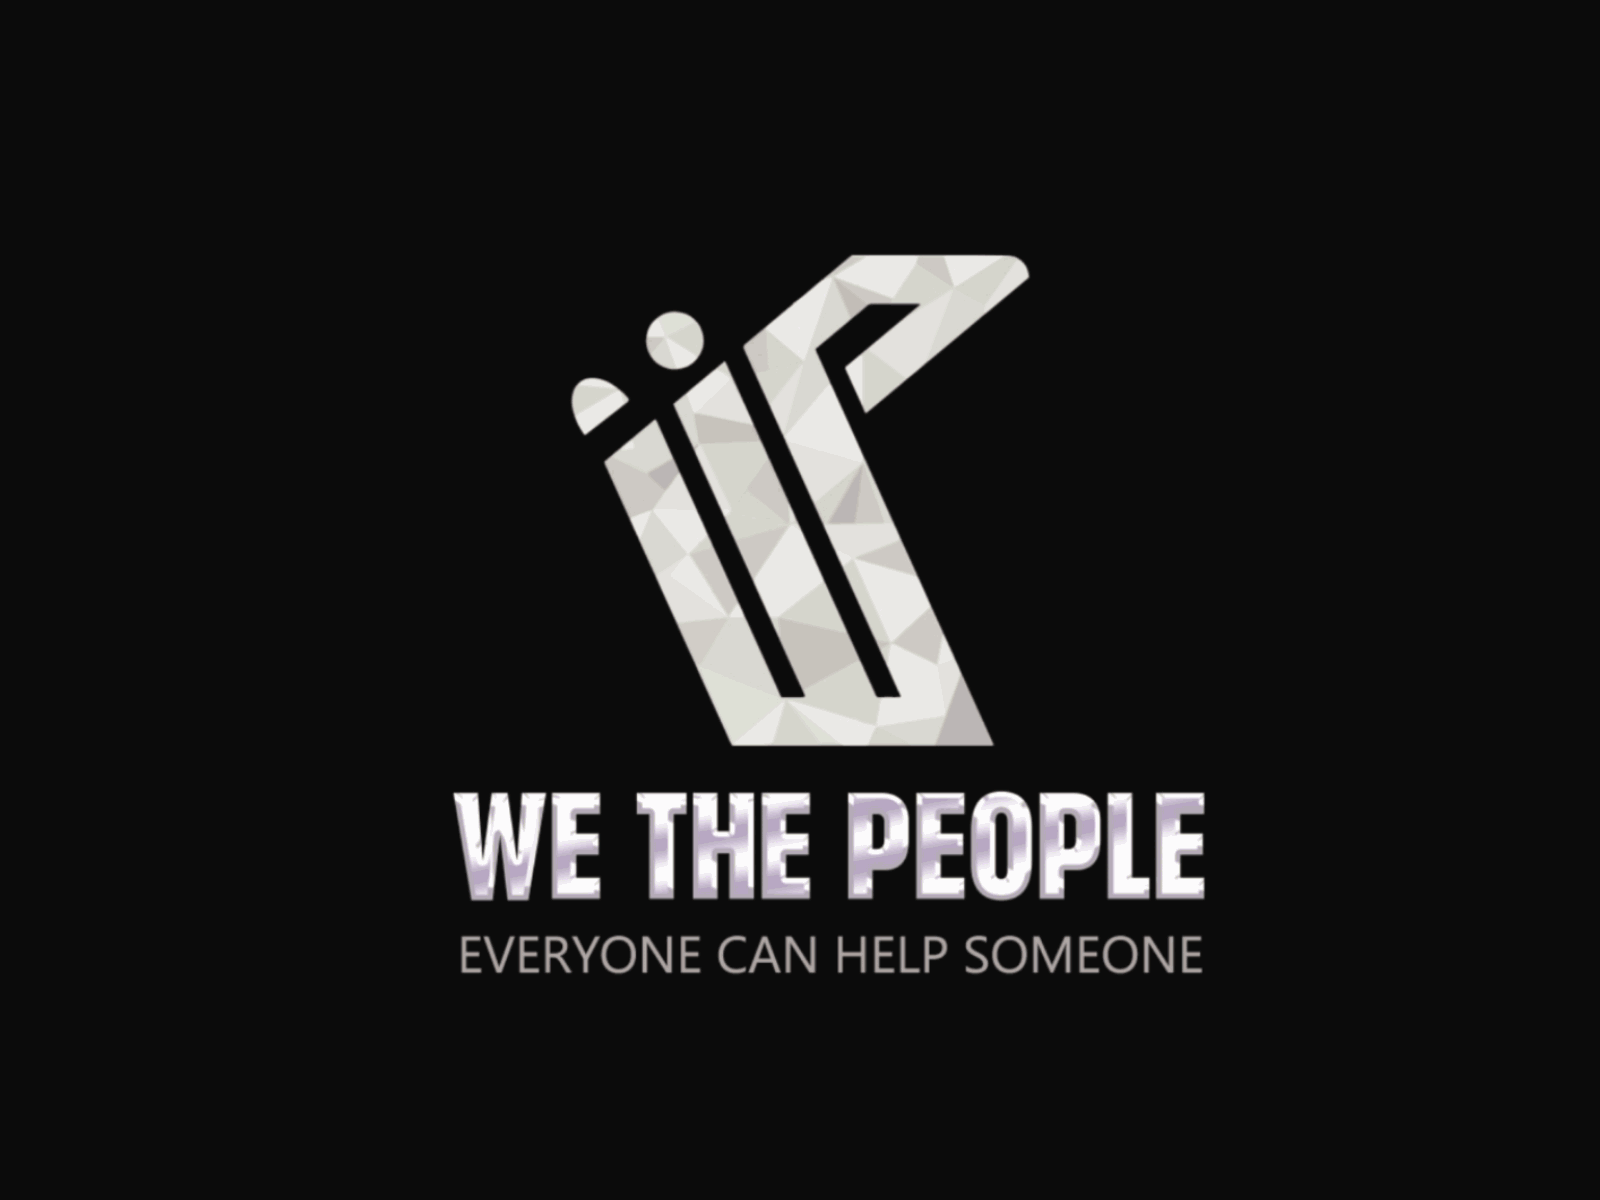 Logo animation for WE THE PEOPLE 2d animation animated logo branding gif intro logo logo animation logo animation service logo intro logo motion logoanimation motion graphics motion logo people logo animation reveal we the people